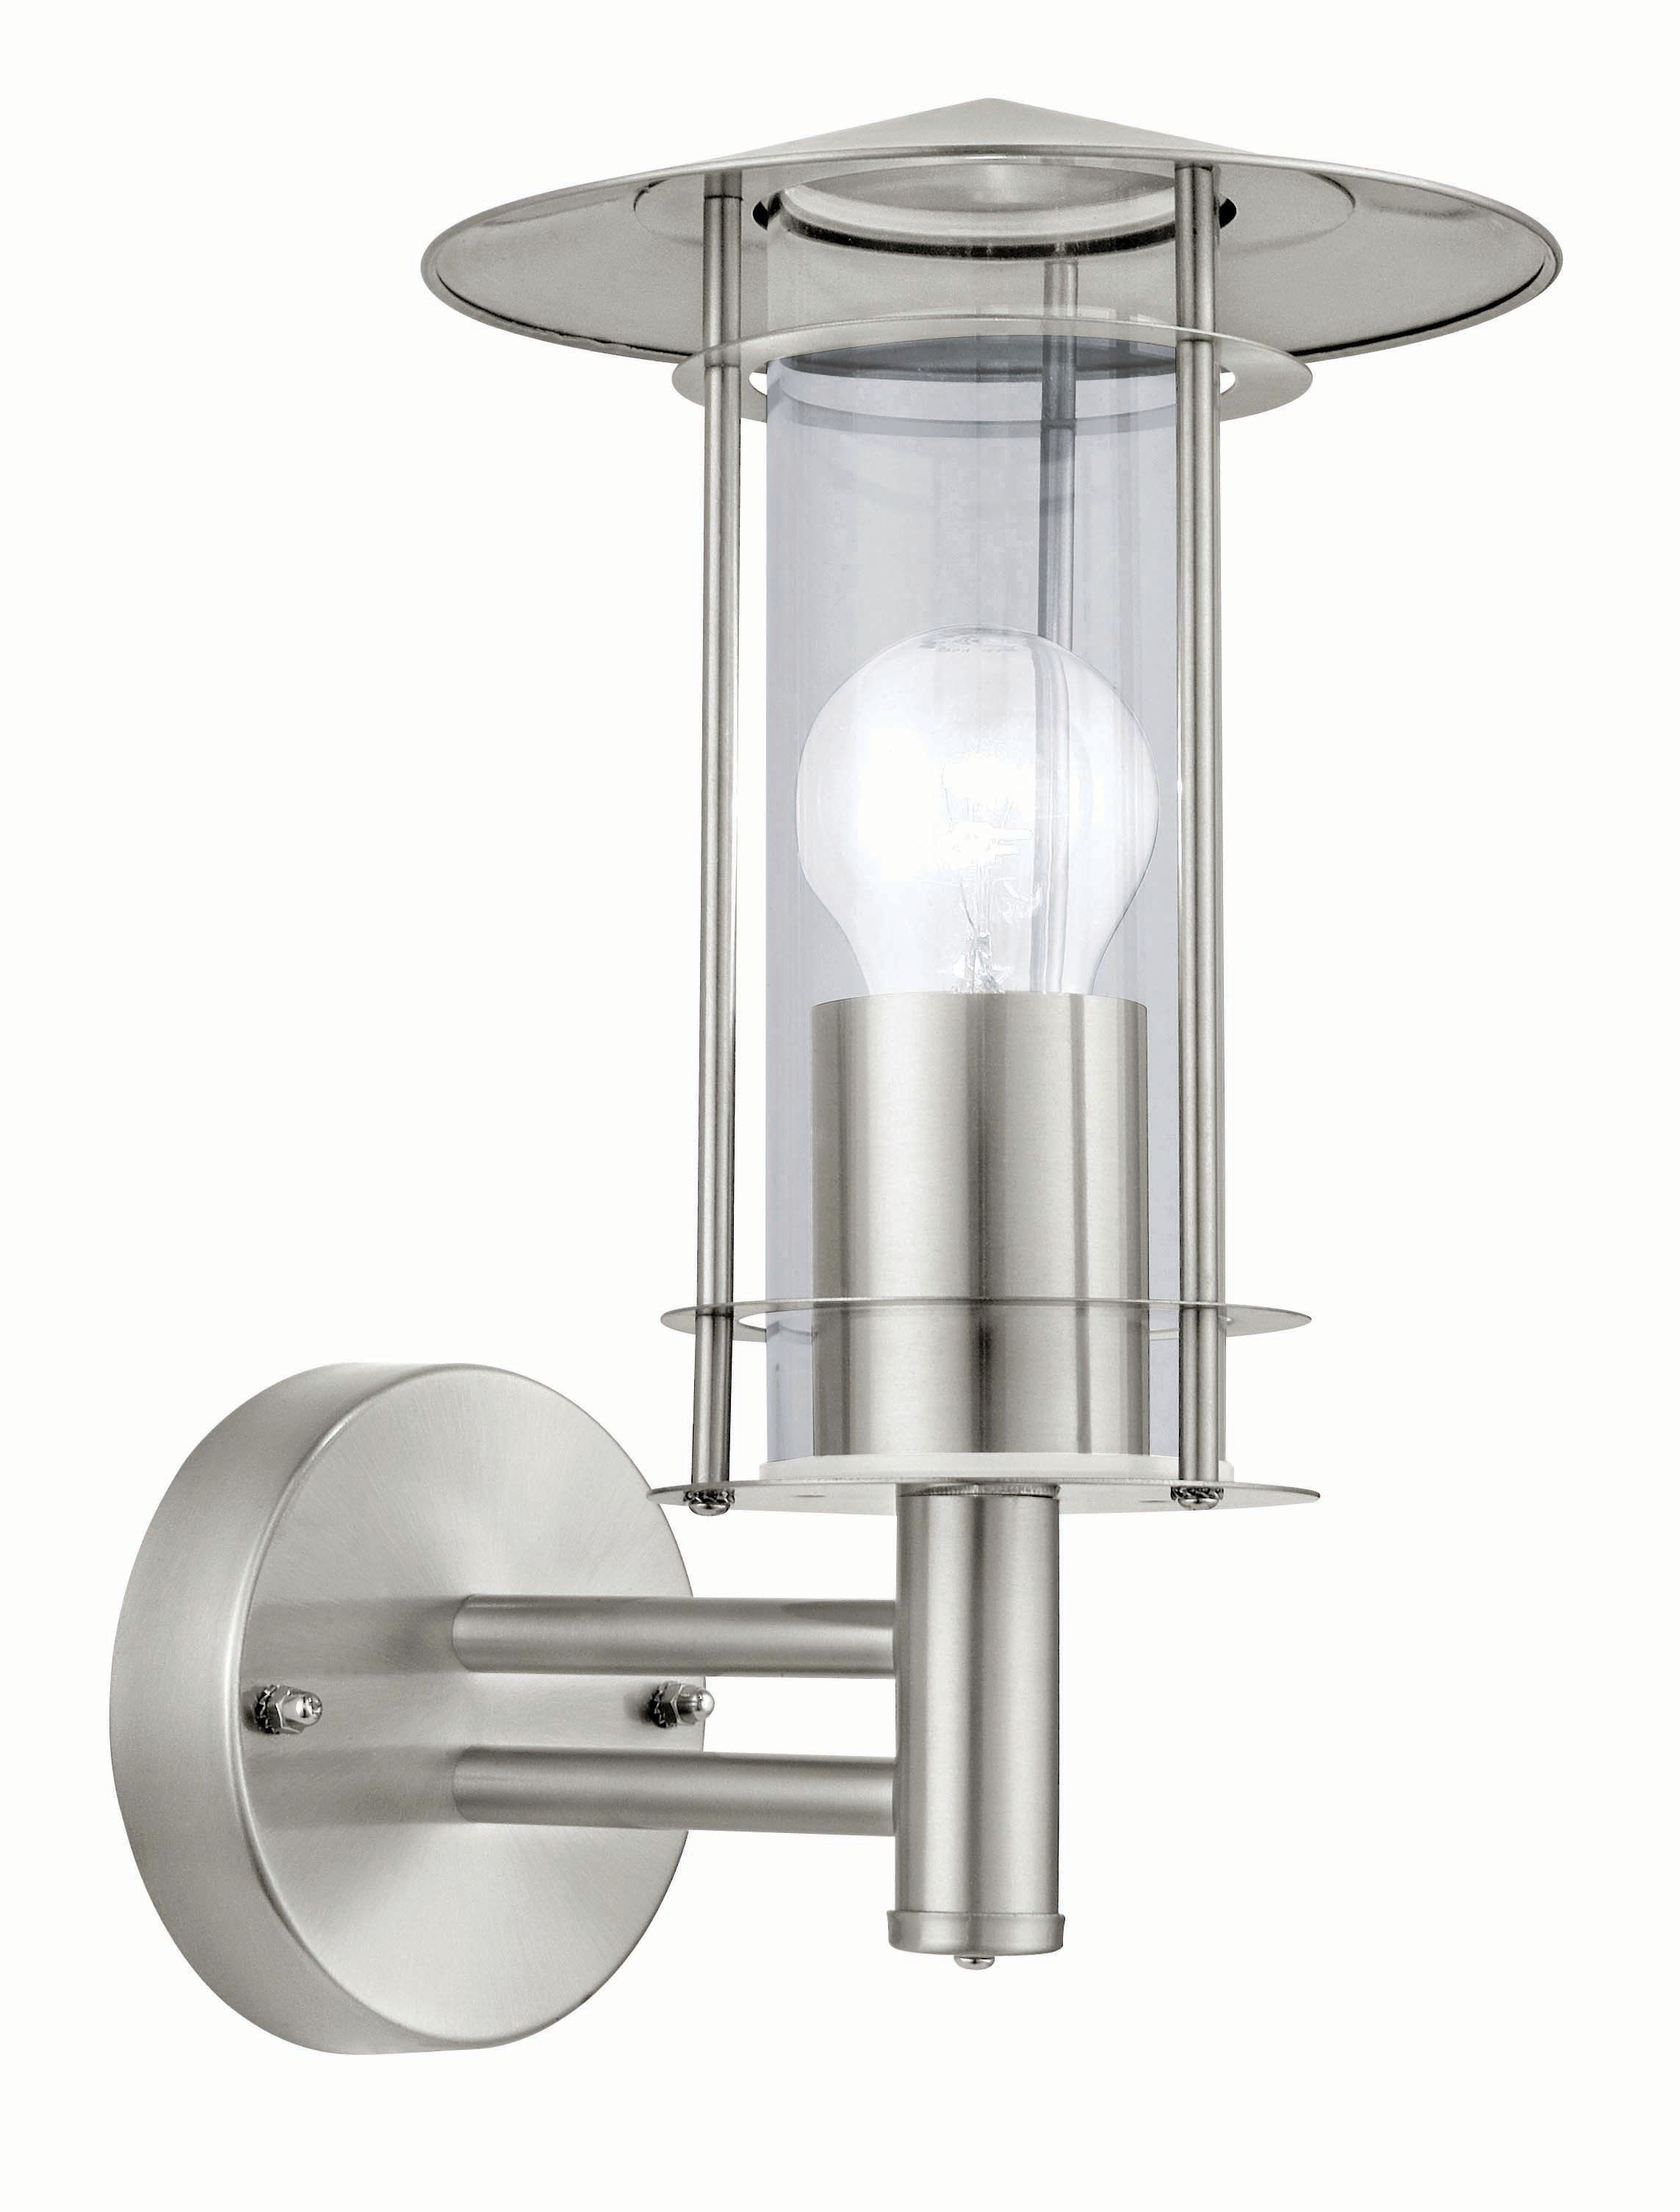 Image of Eglo Lisio Outdoor Stainless Steel Lantern Wall Light - 60W E27